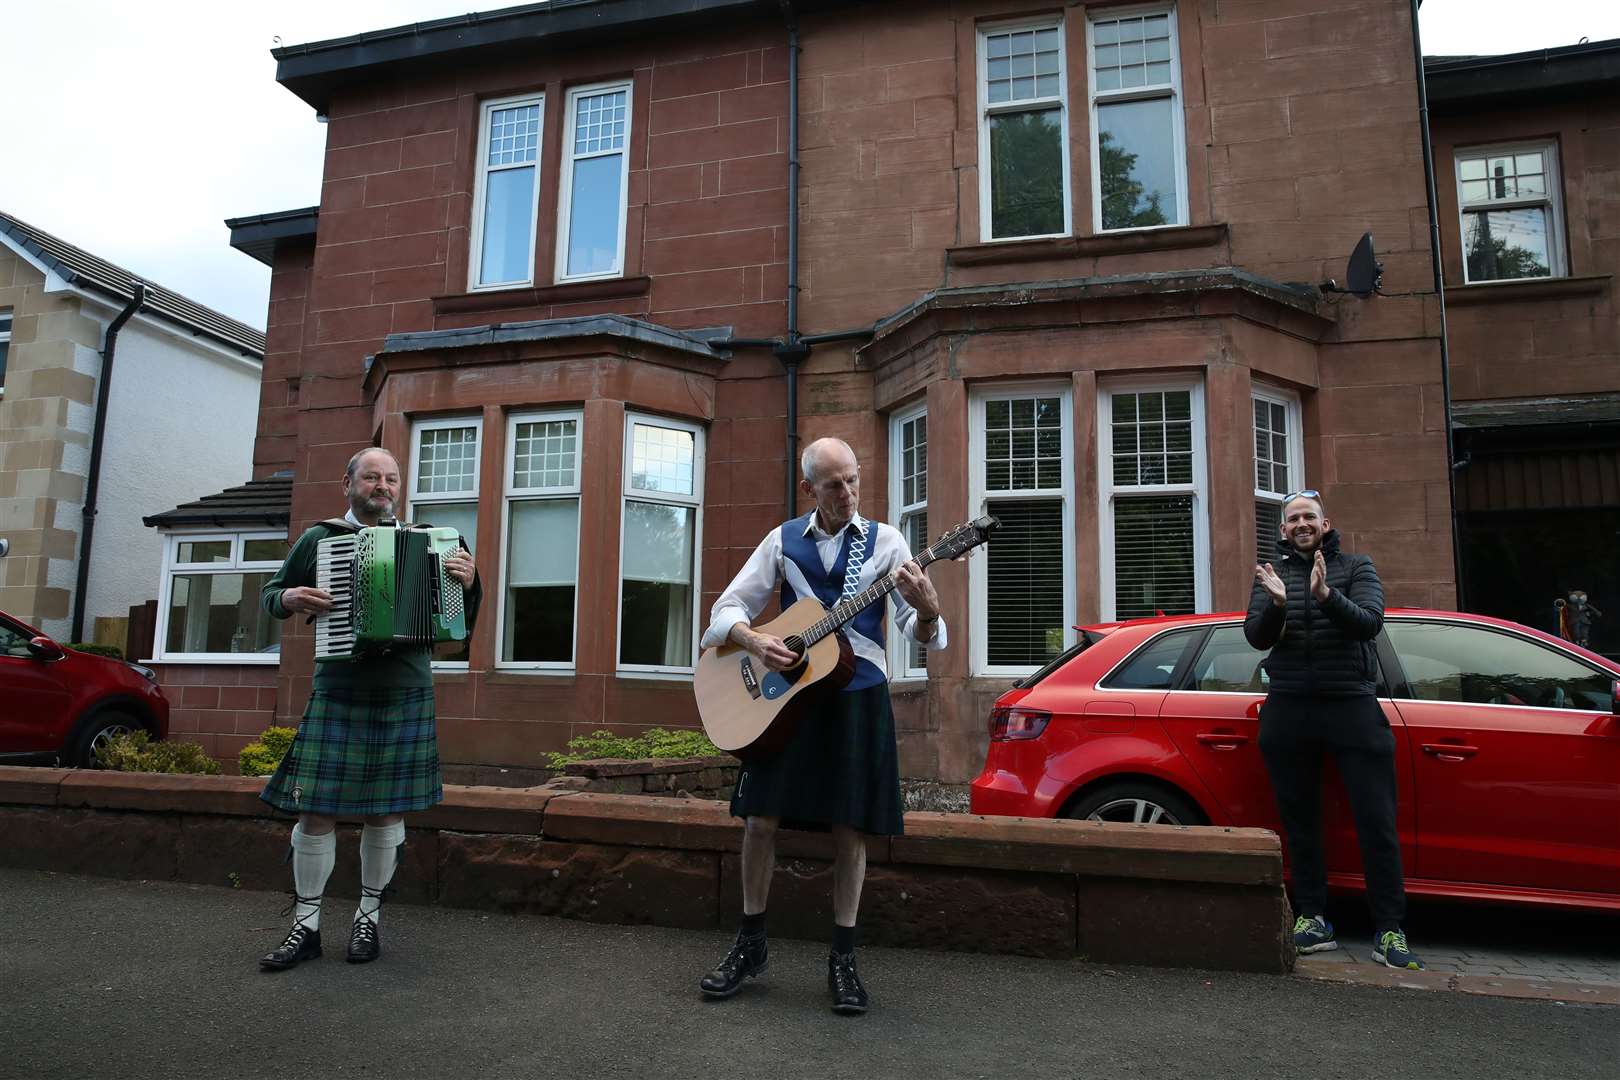 Many neighbours across Britain have joined together for the weekly Clap for Carers event (Andrew Milligan/PA)